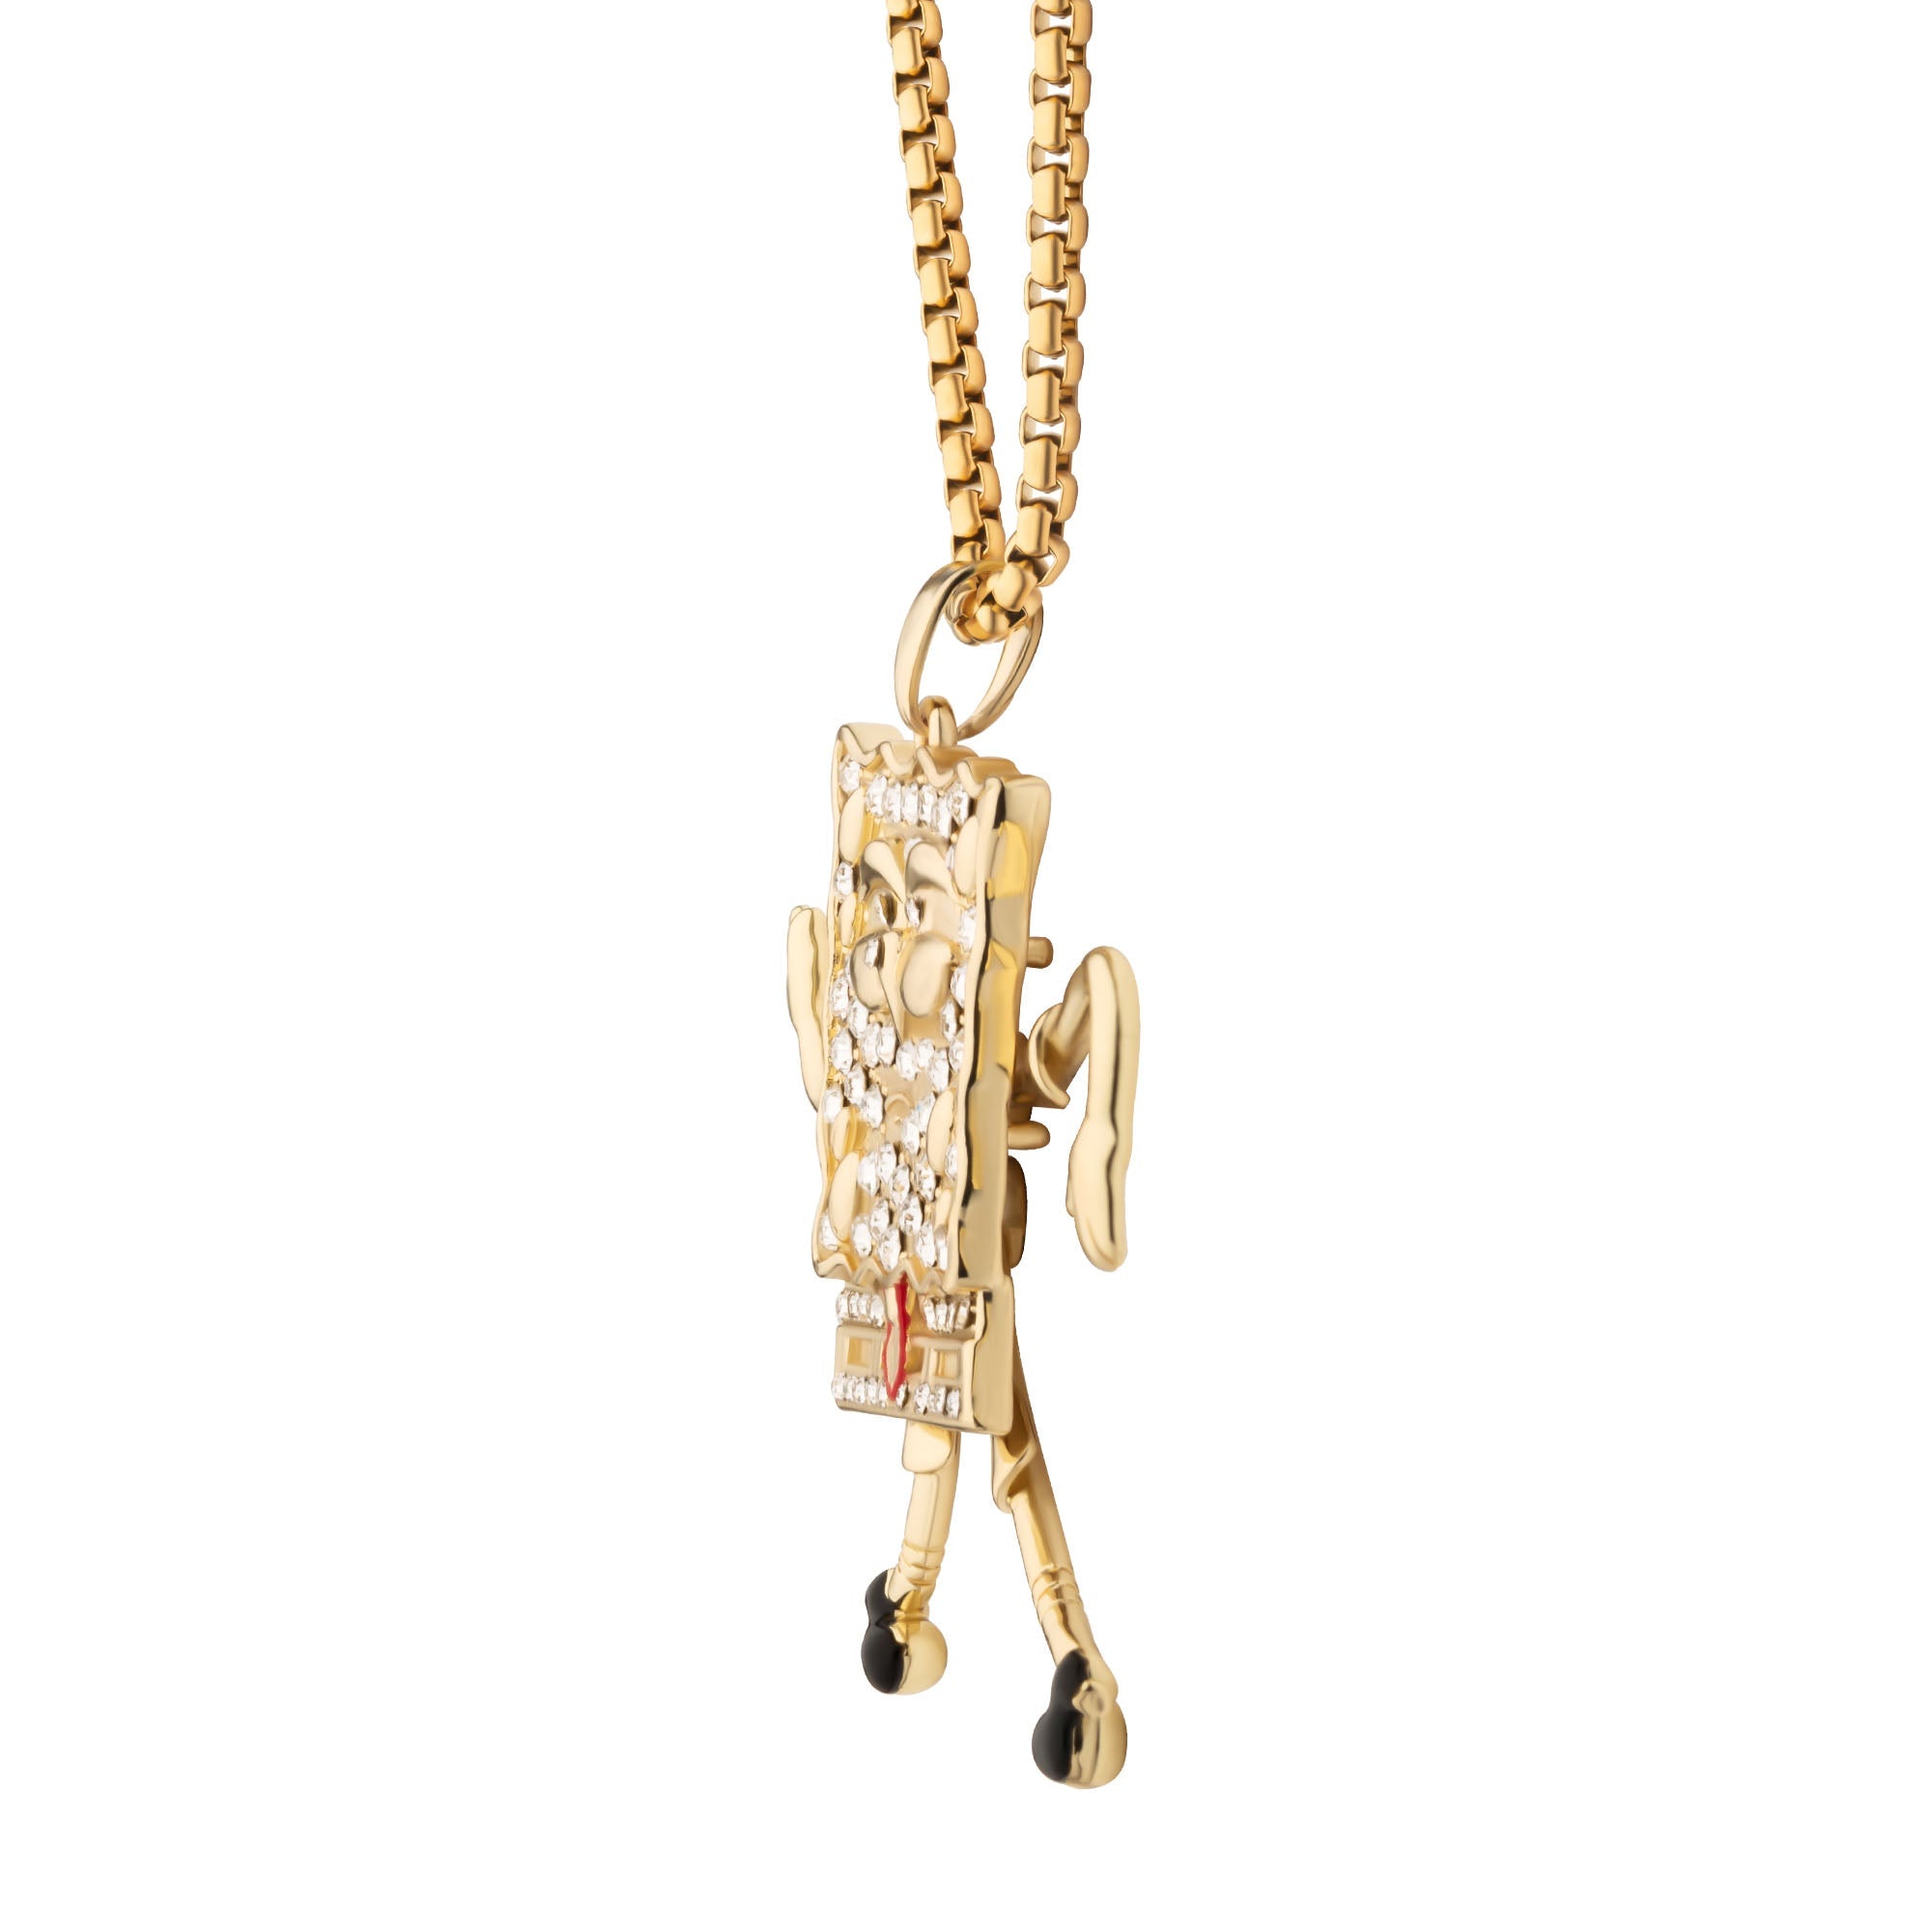 Nickelodeon Gold Plated Spongebob Dancing Bling Pendant with Gold IP Steel Chain.